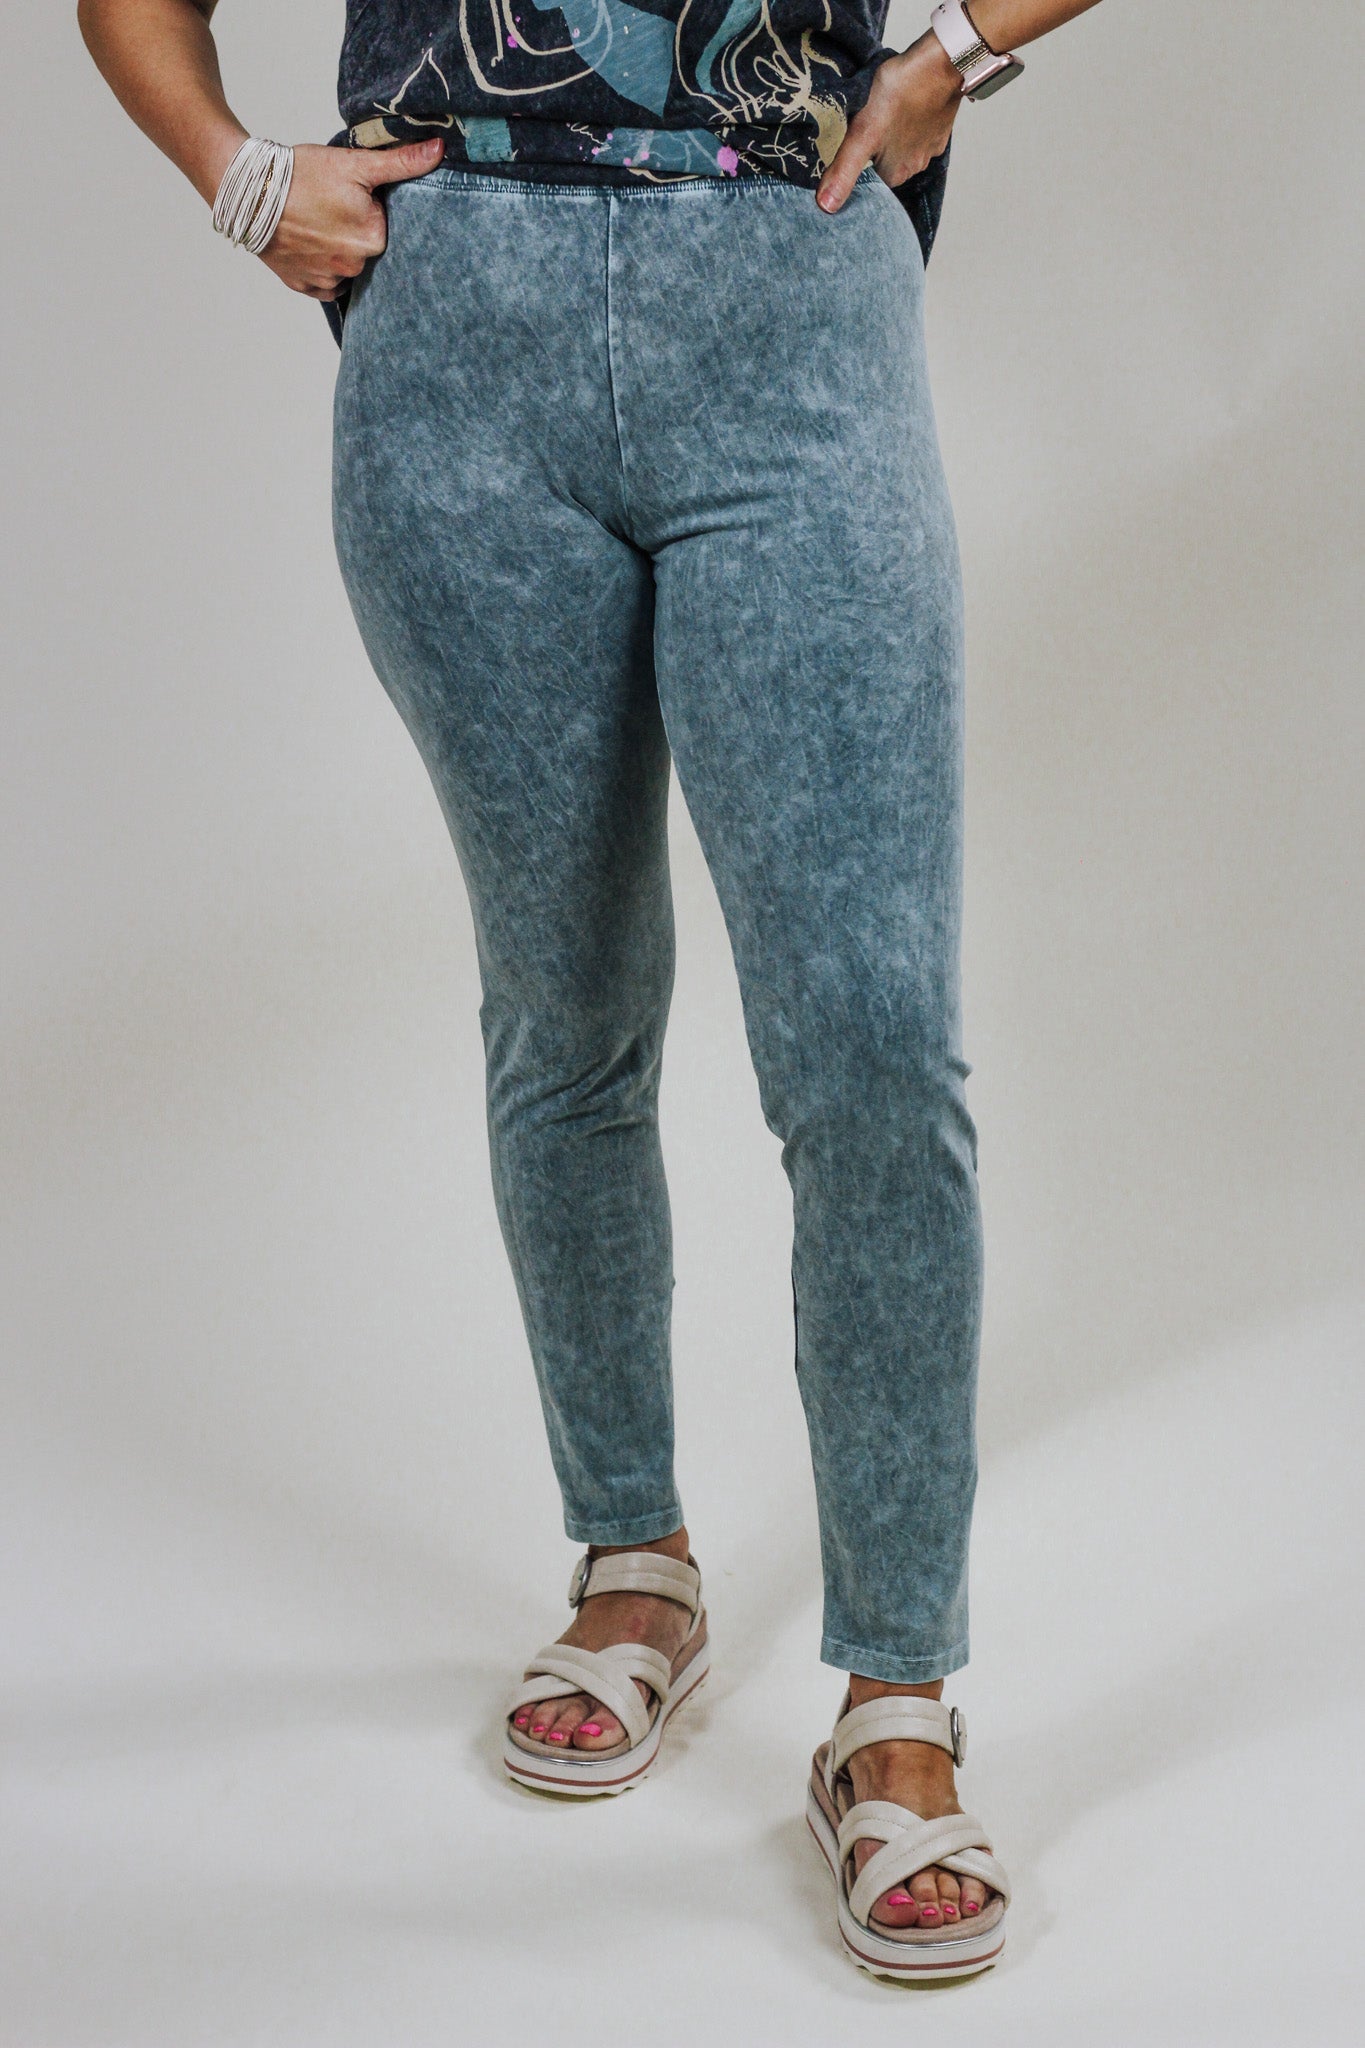 JESS AND JANE Mineral Washed Pants | Apparel Bottoms Pants